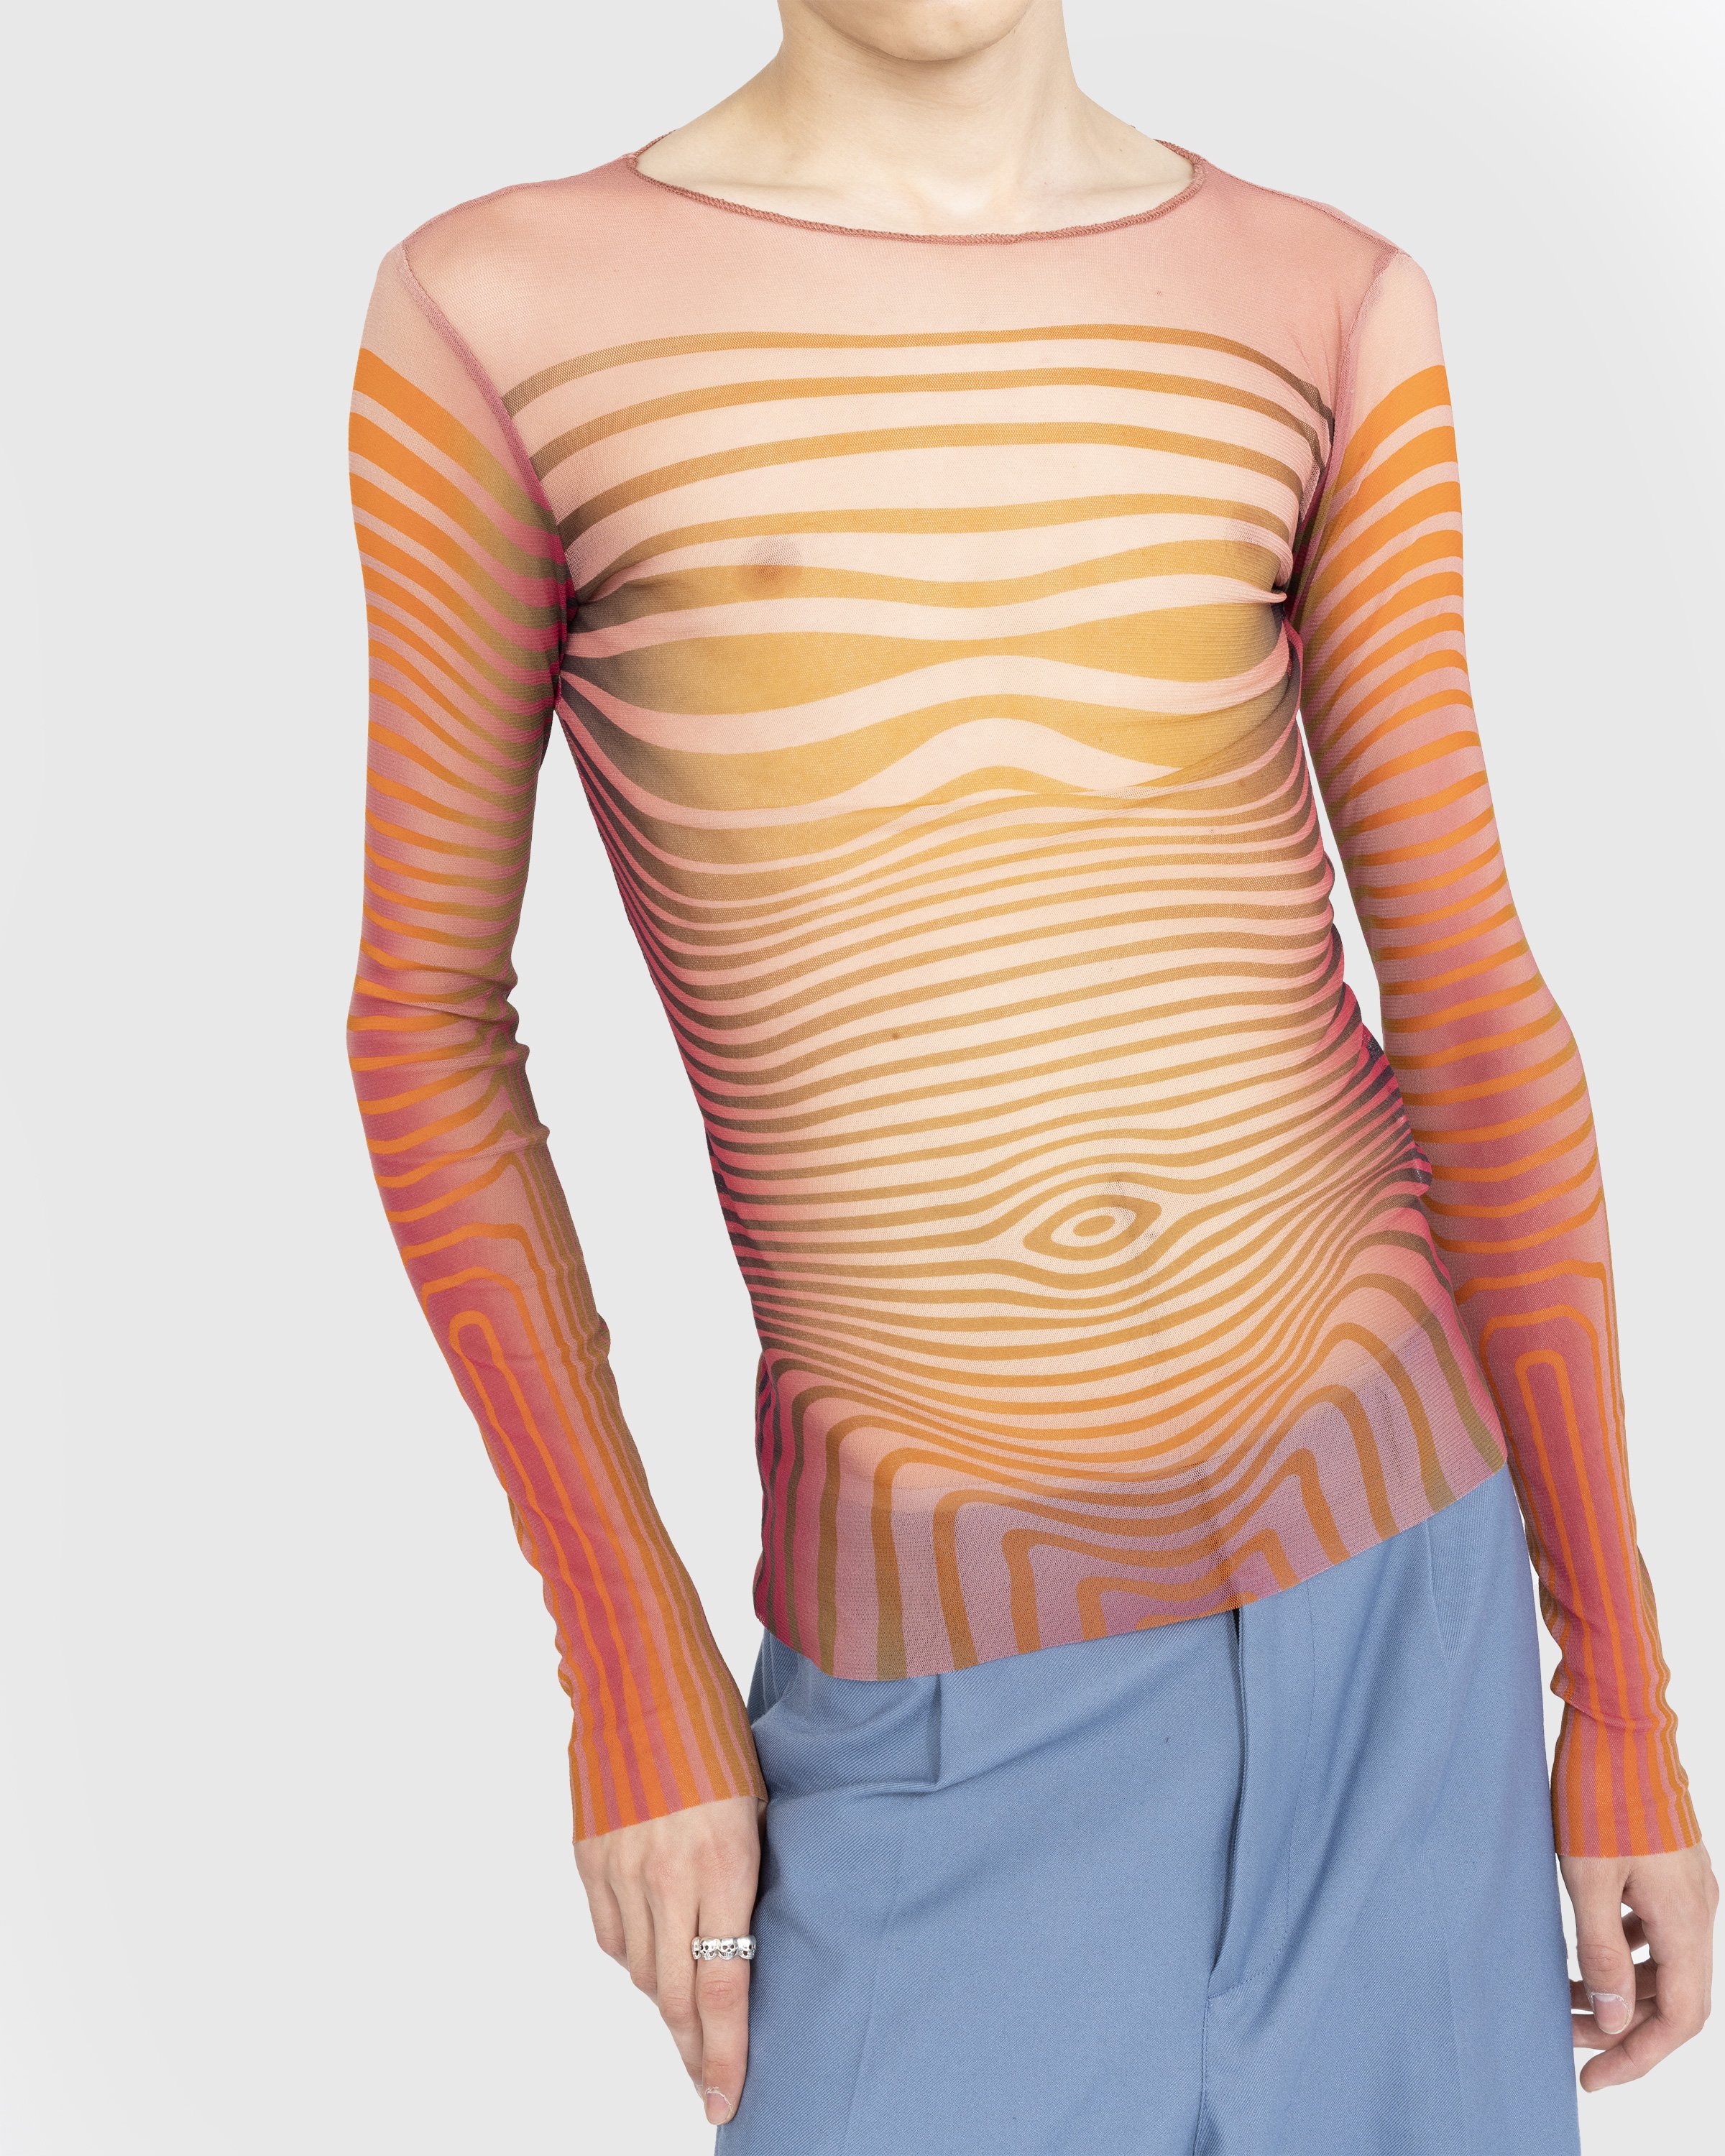 Jean Paul Gaultier - Crewneck Long Sleeves Printed Morphing Stripes Red - Clothing - Red - Image 4